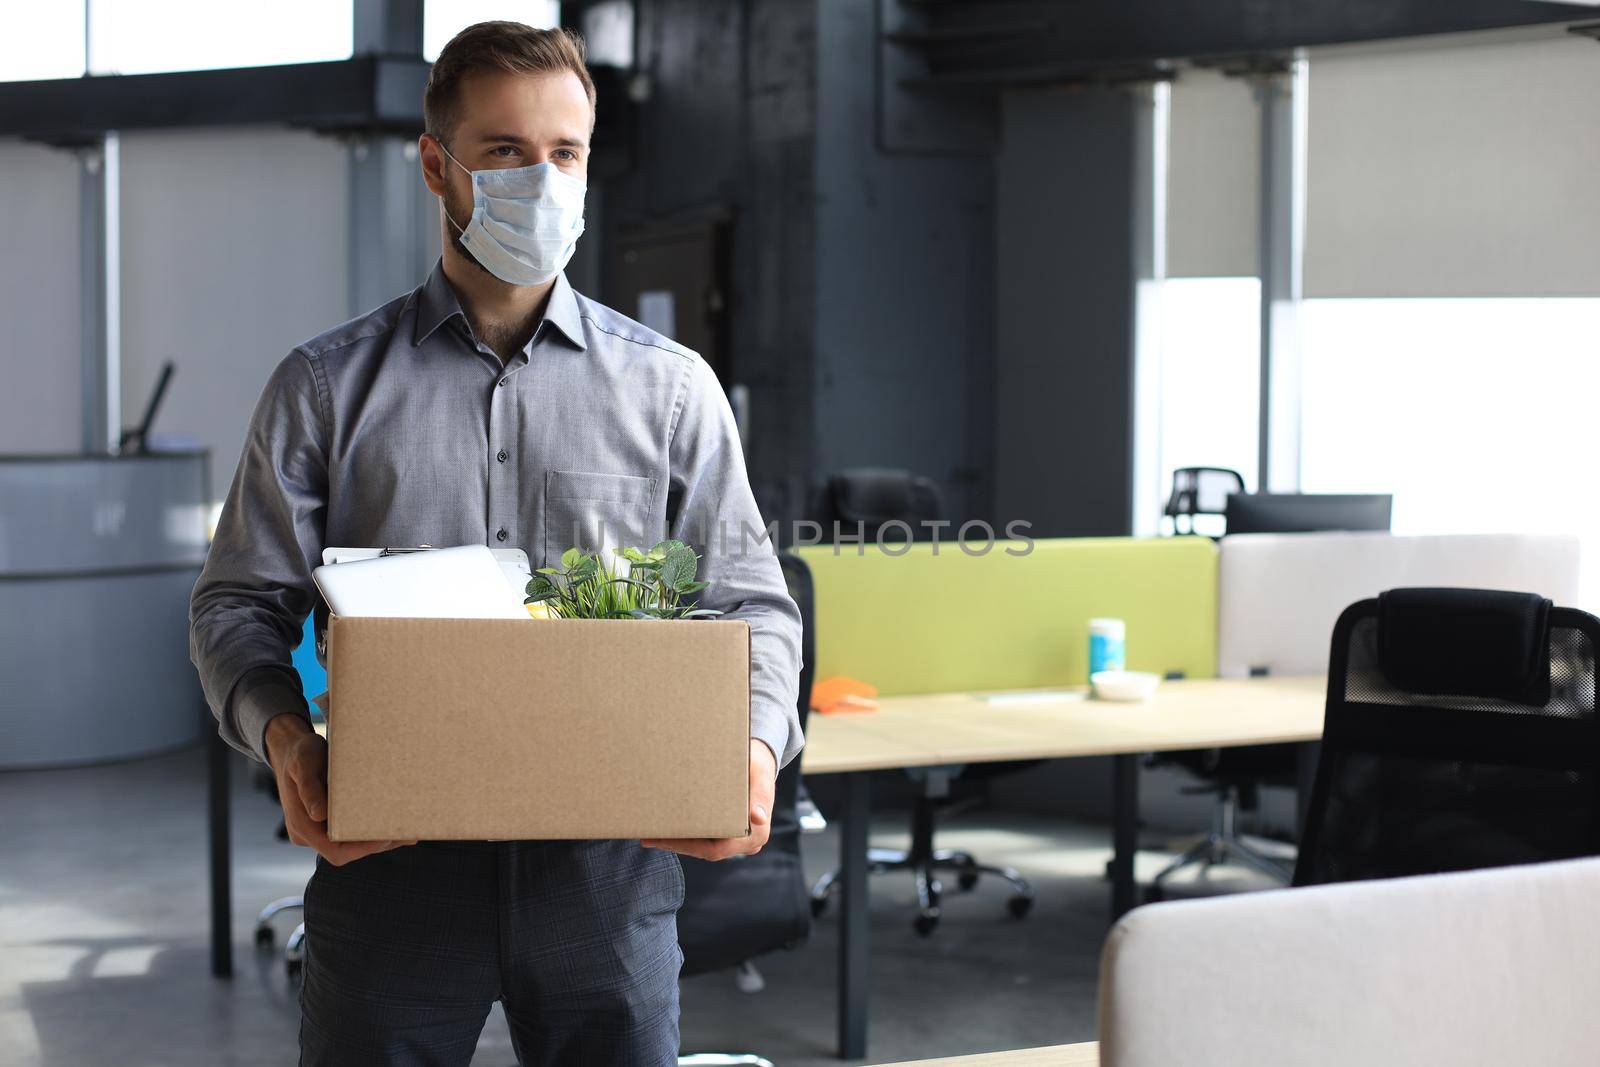 Dismissal employee in an epidemic coronavirus. Dismissed worker going from the office with his office supplies. by tsyhun